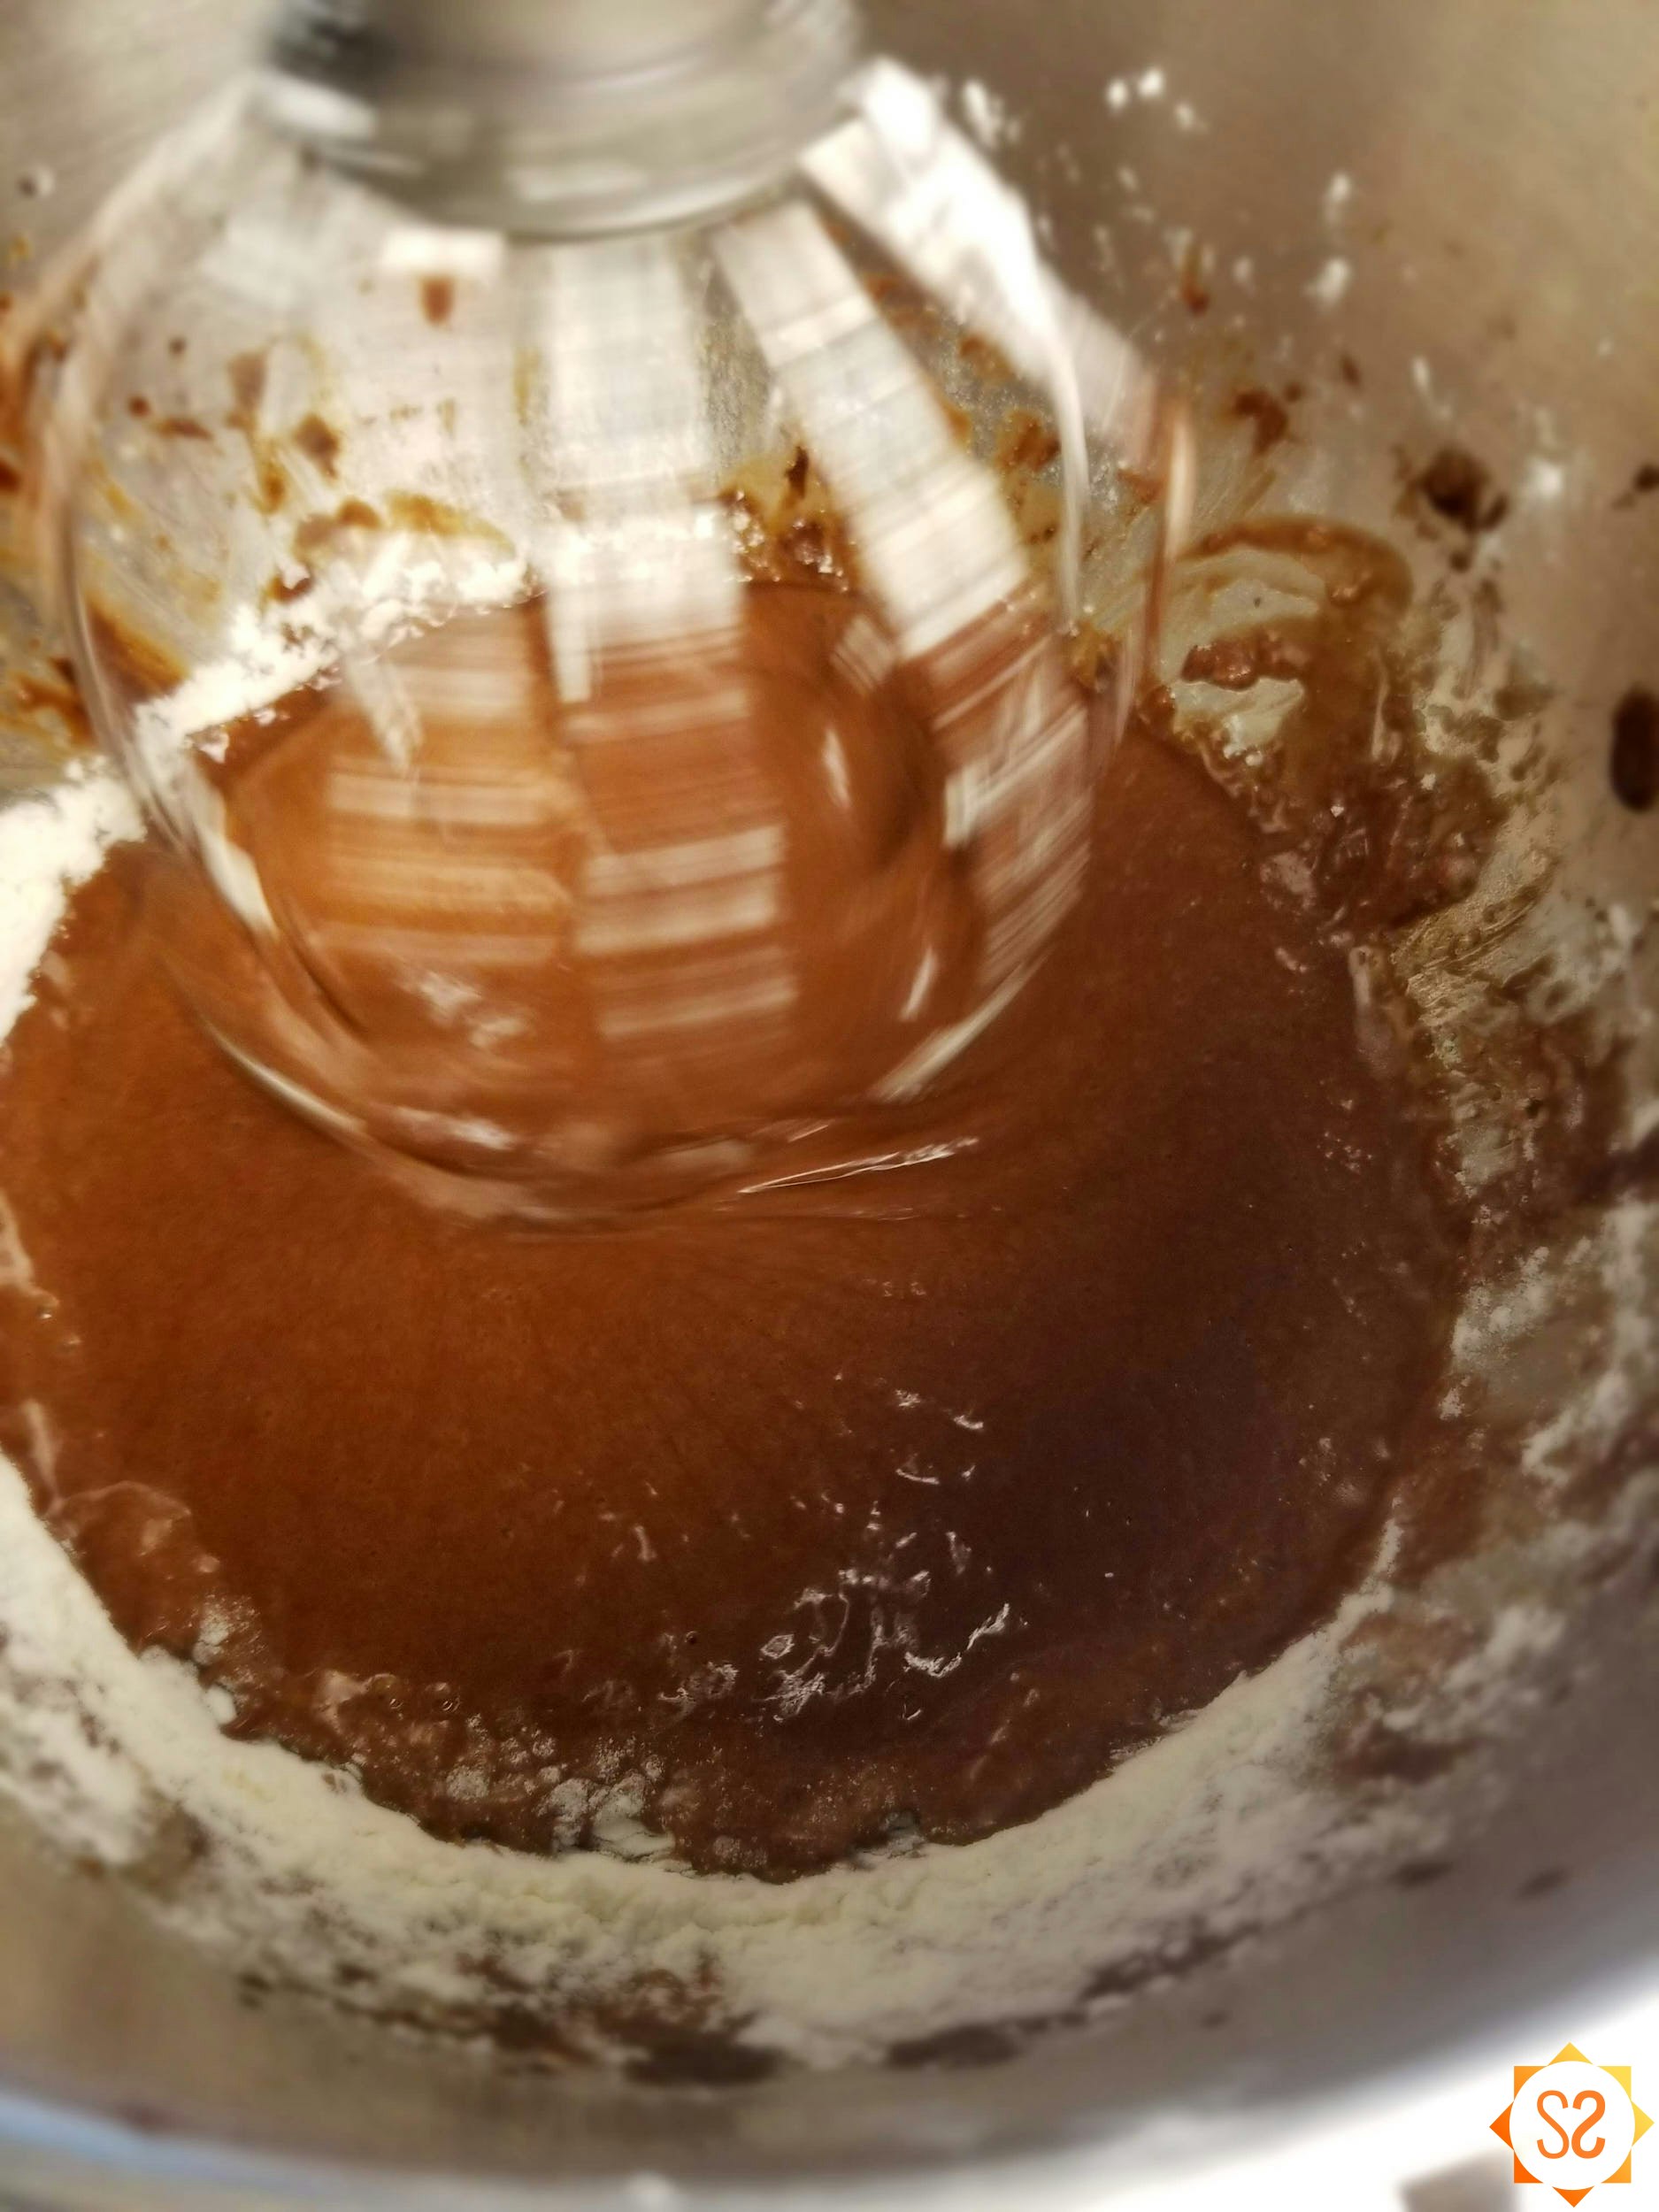 Chocolate cake batter being mixed in a mixing bowl.